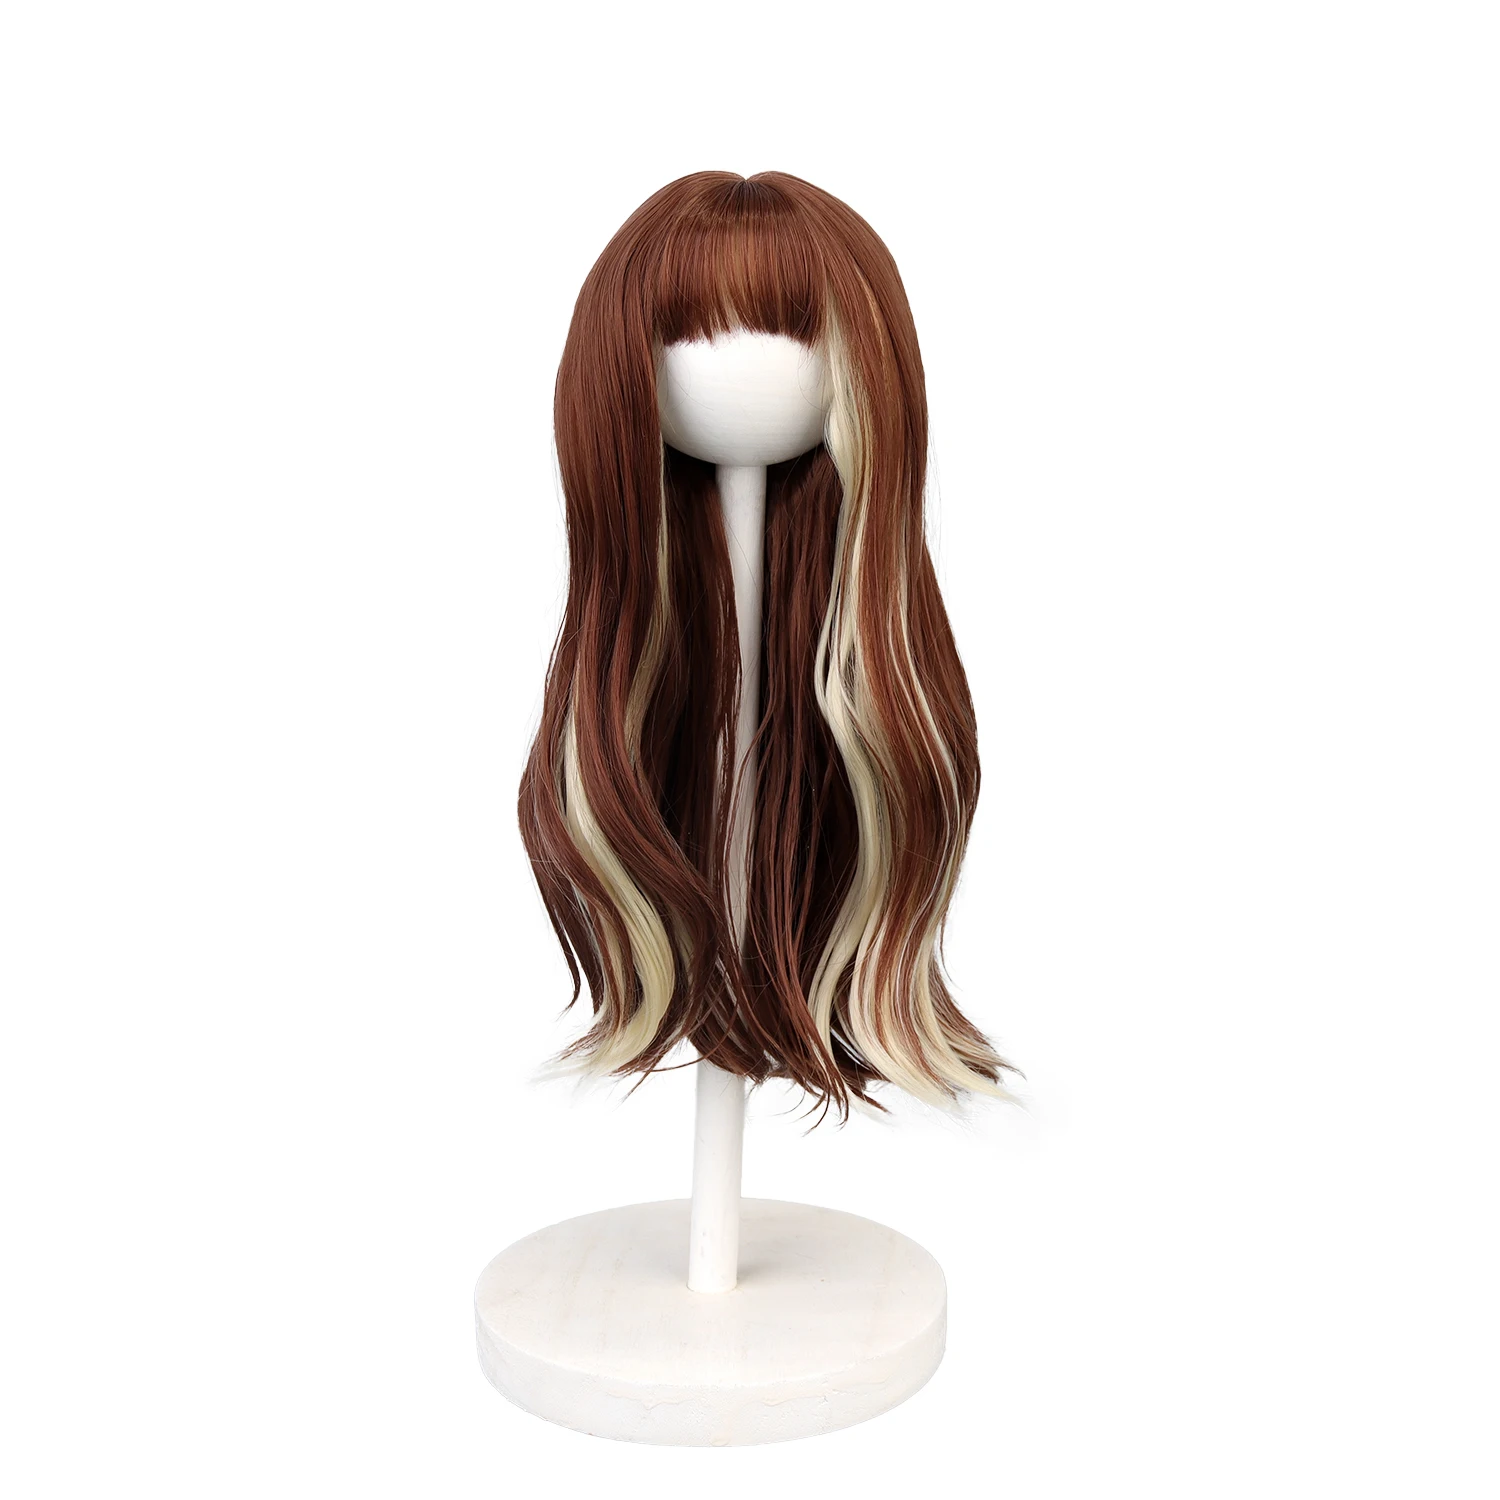 18 Inch American Doll Wigs 27cm Head Circumference Long Wavy Red Brown Blonde Highlight  High Temperature Hair For Doll Girls